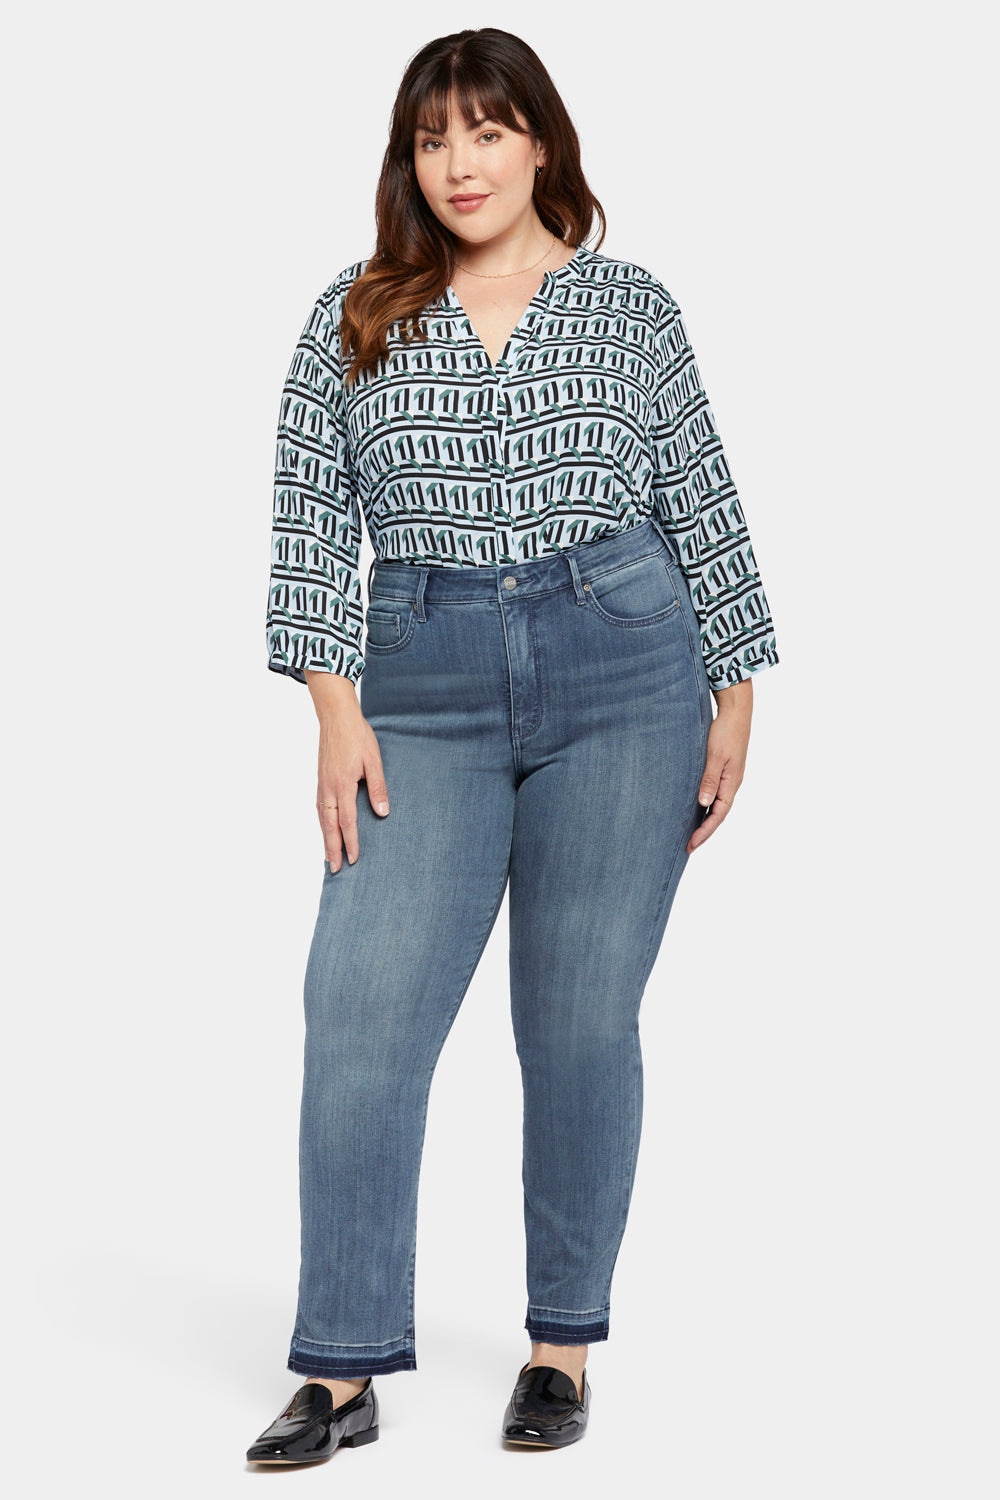 Straight Jeans Women Plus Size High Waisted Denim Long Pants Wide